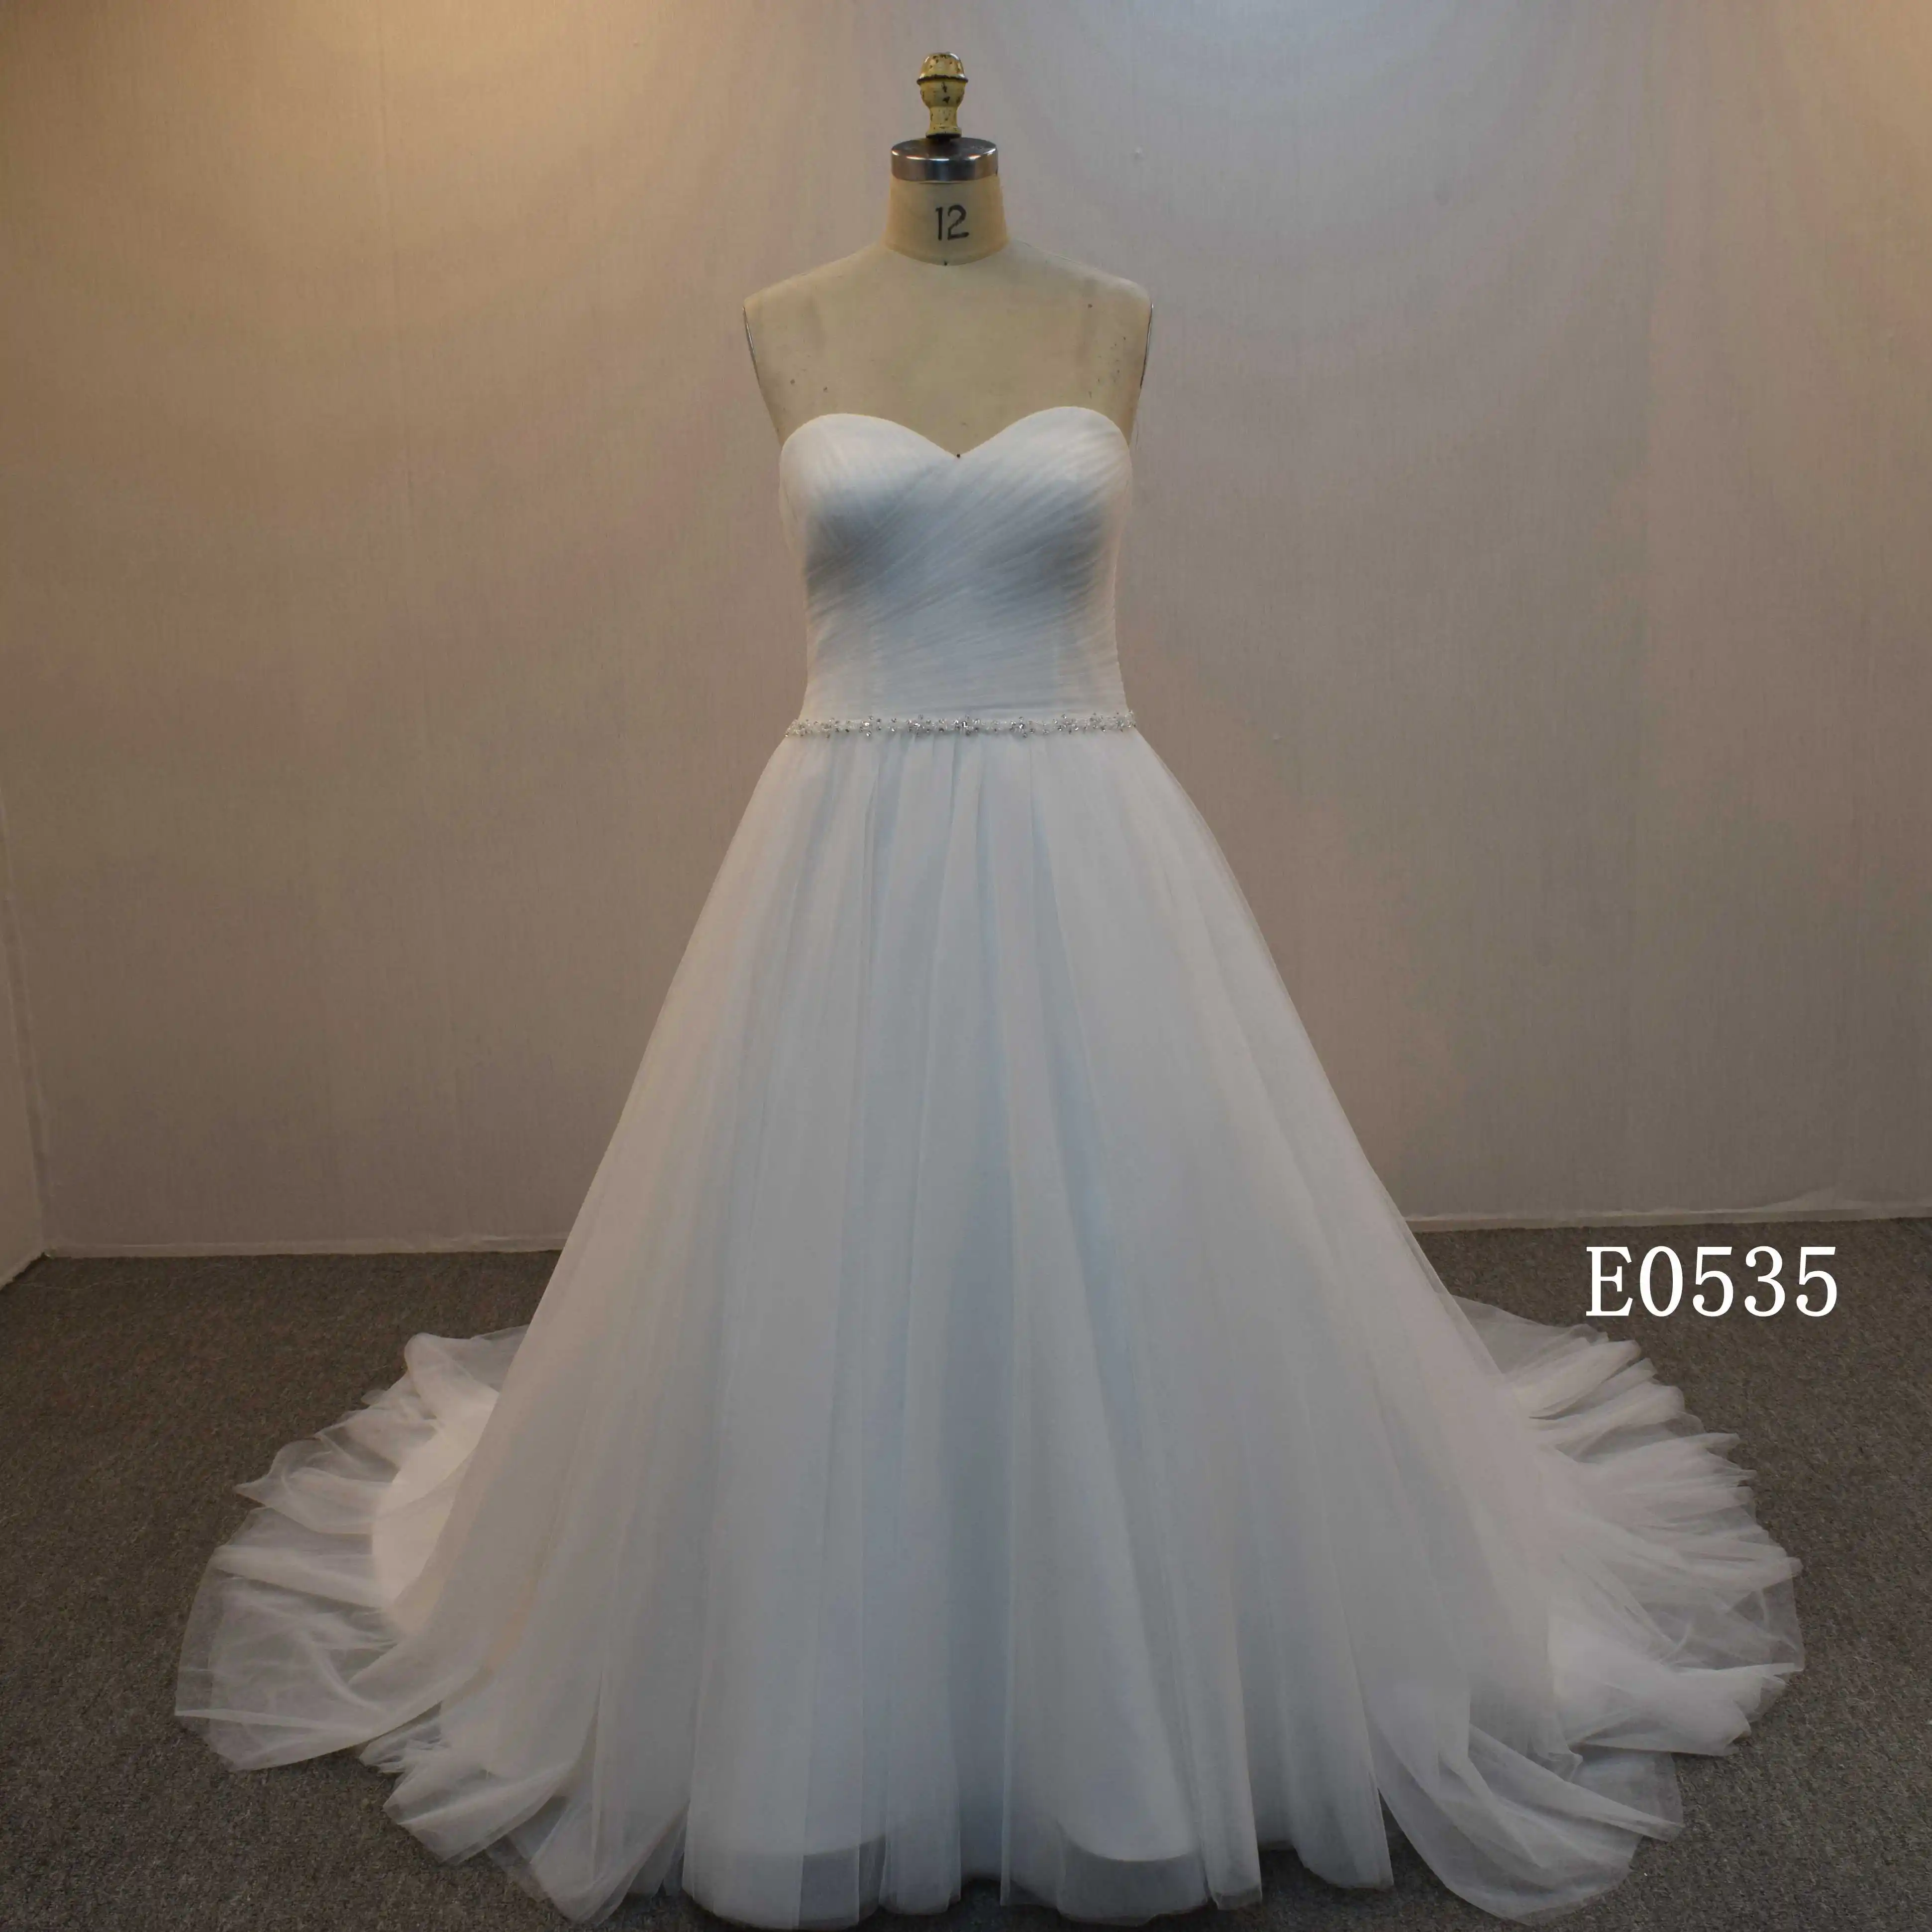 Plus Size Women's Wedding Dress With Pleats On The Bodice And Lace Up Back